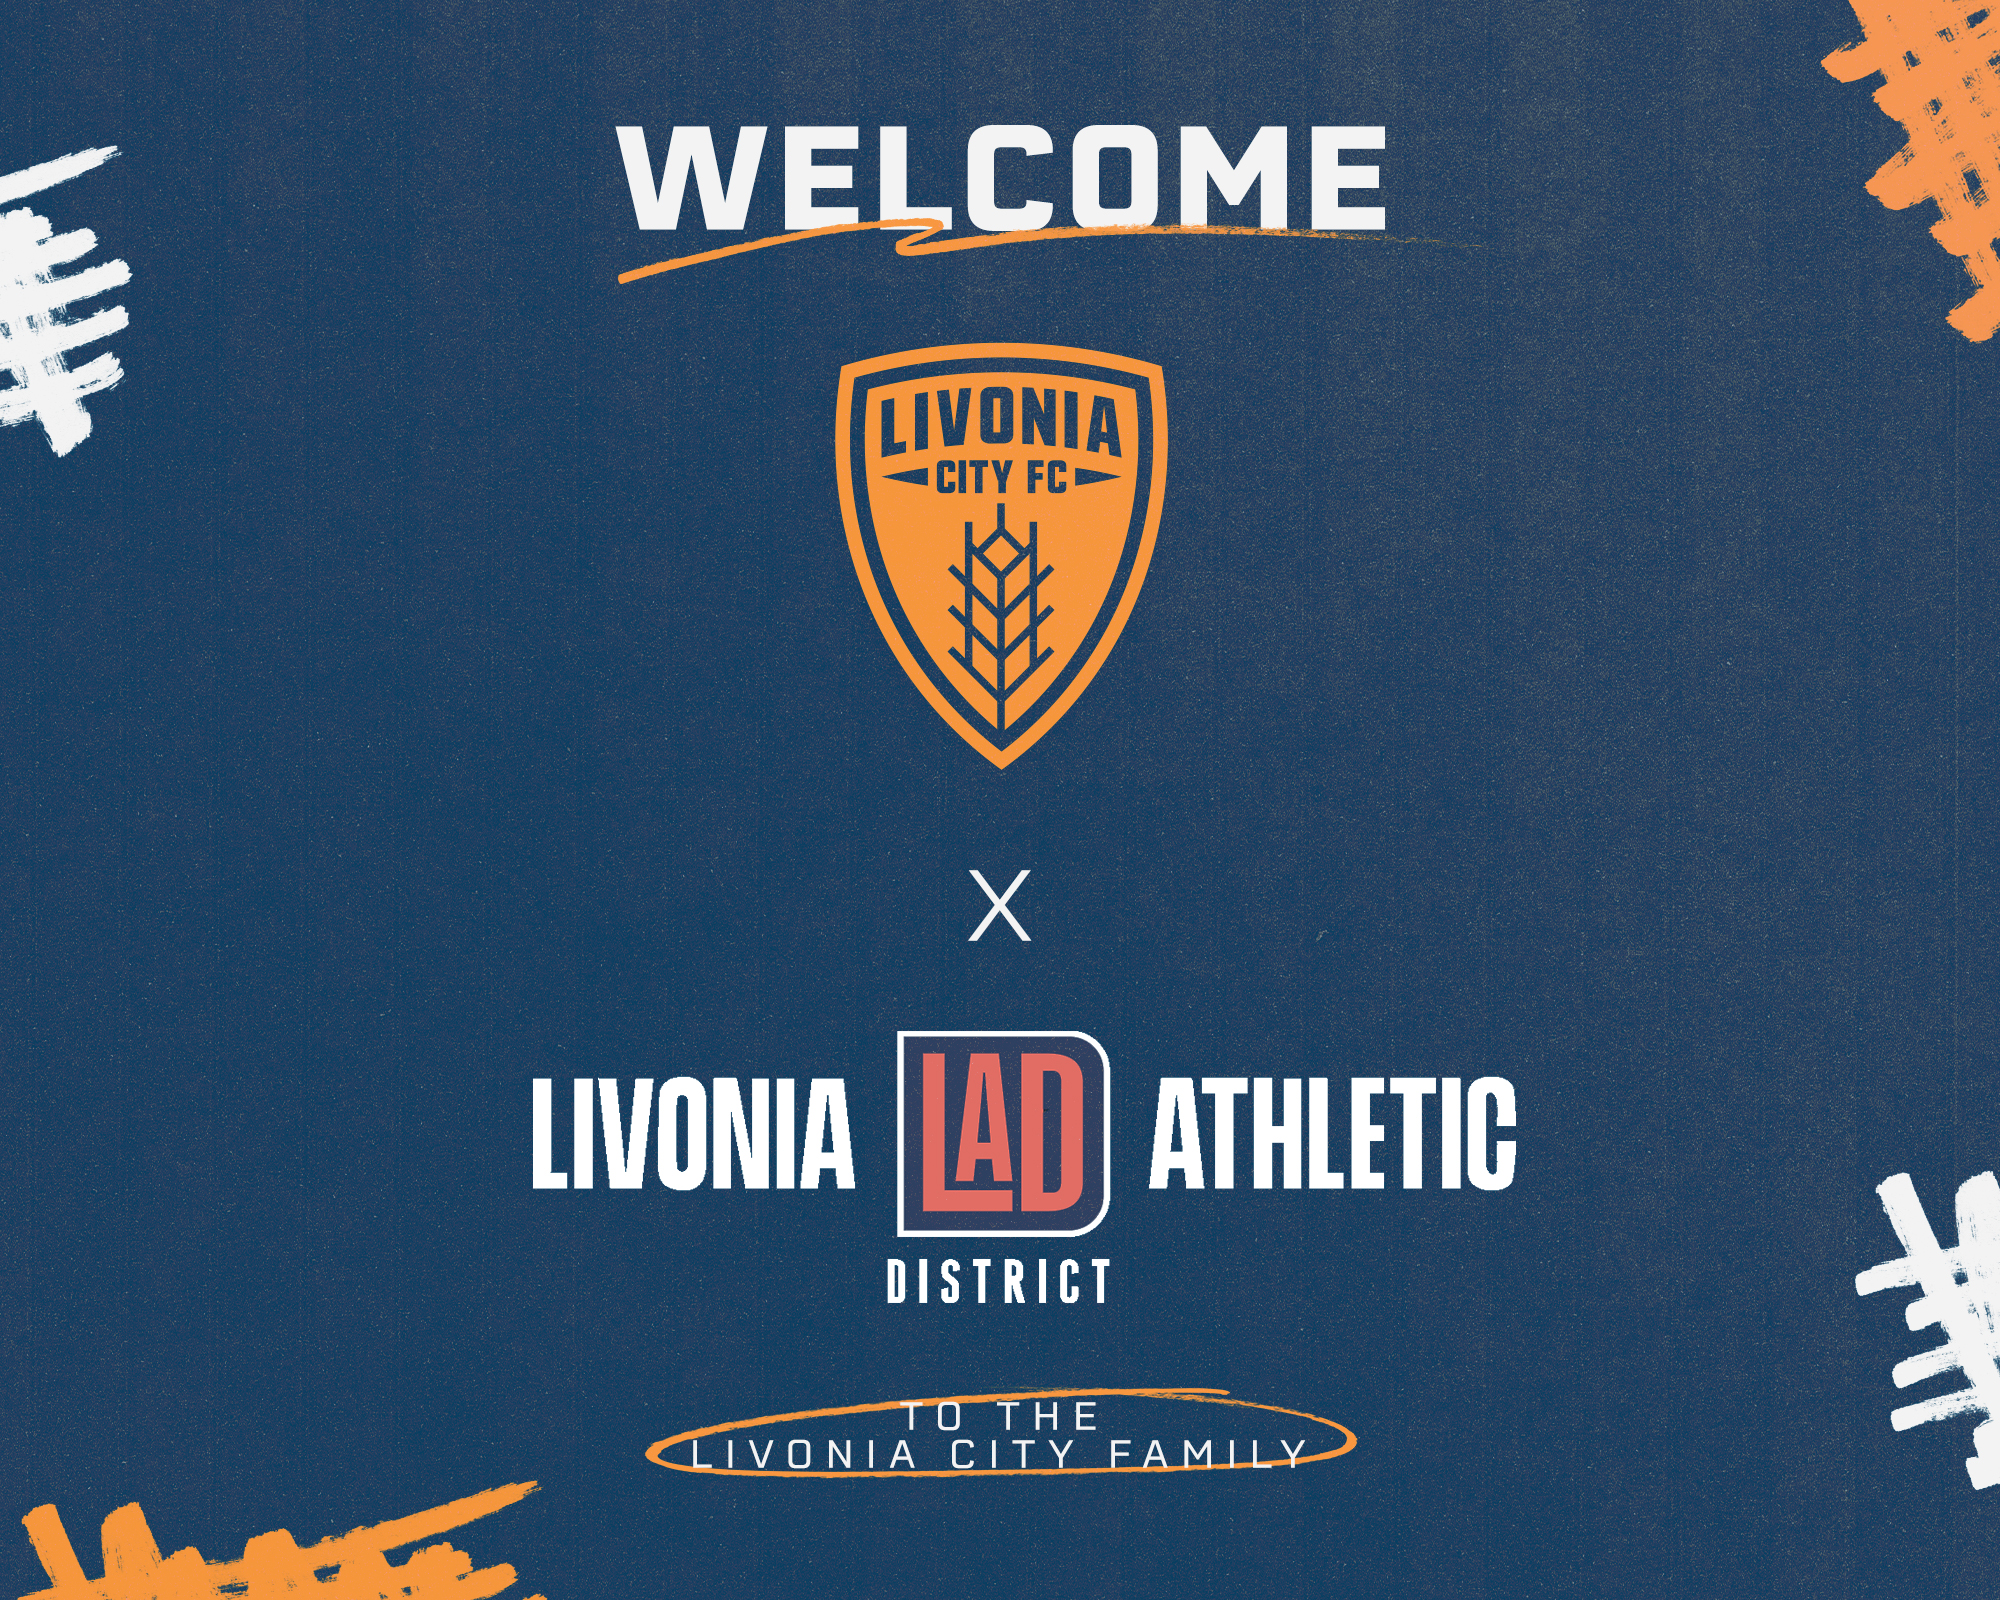 LCFC Announces Livonia Athletic District as Secondary Sponsor